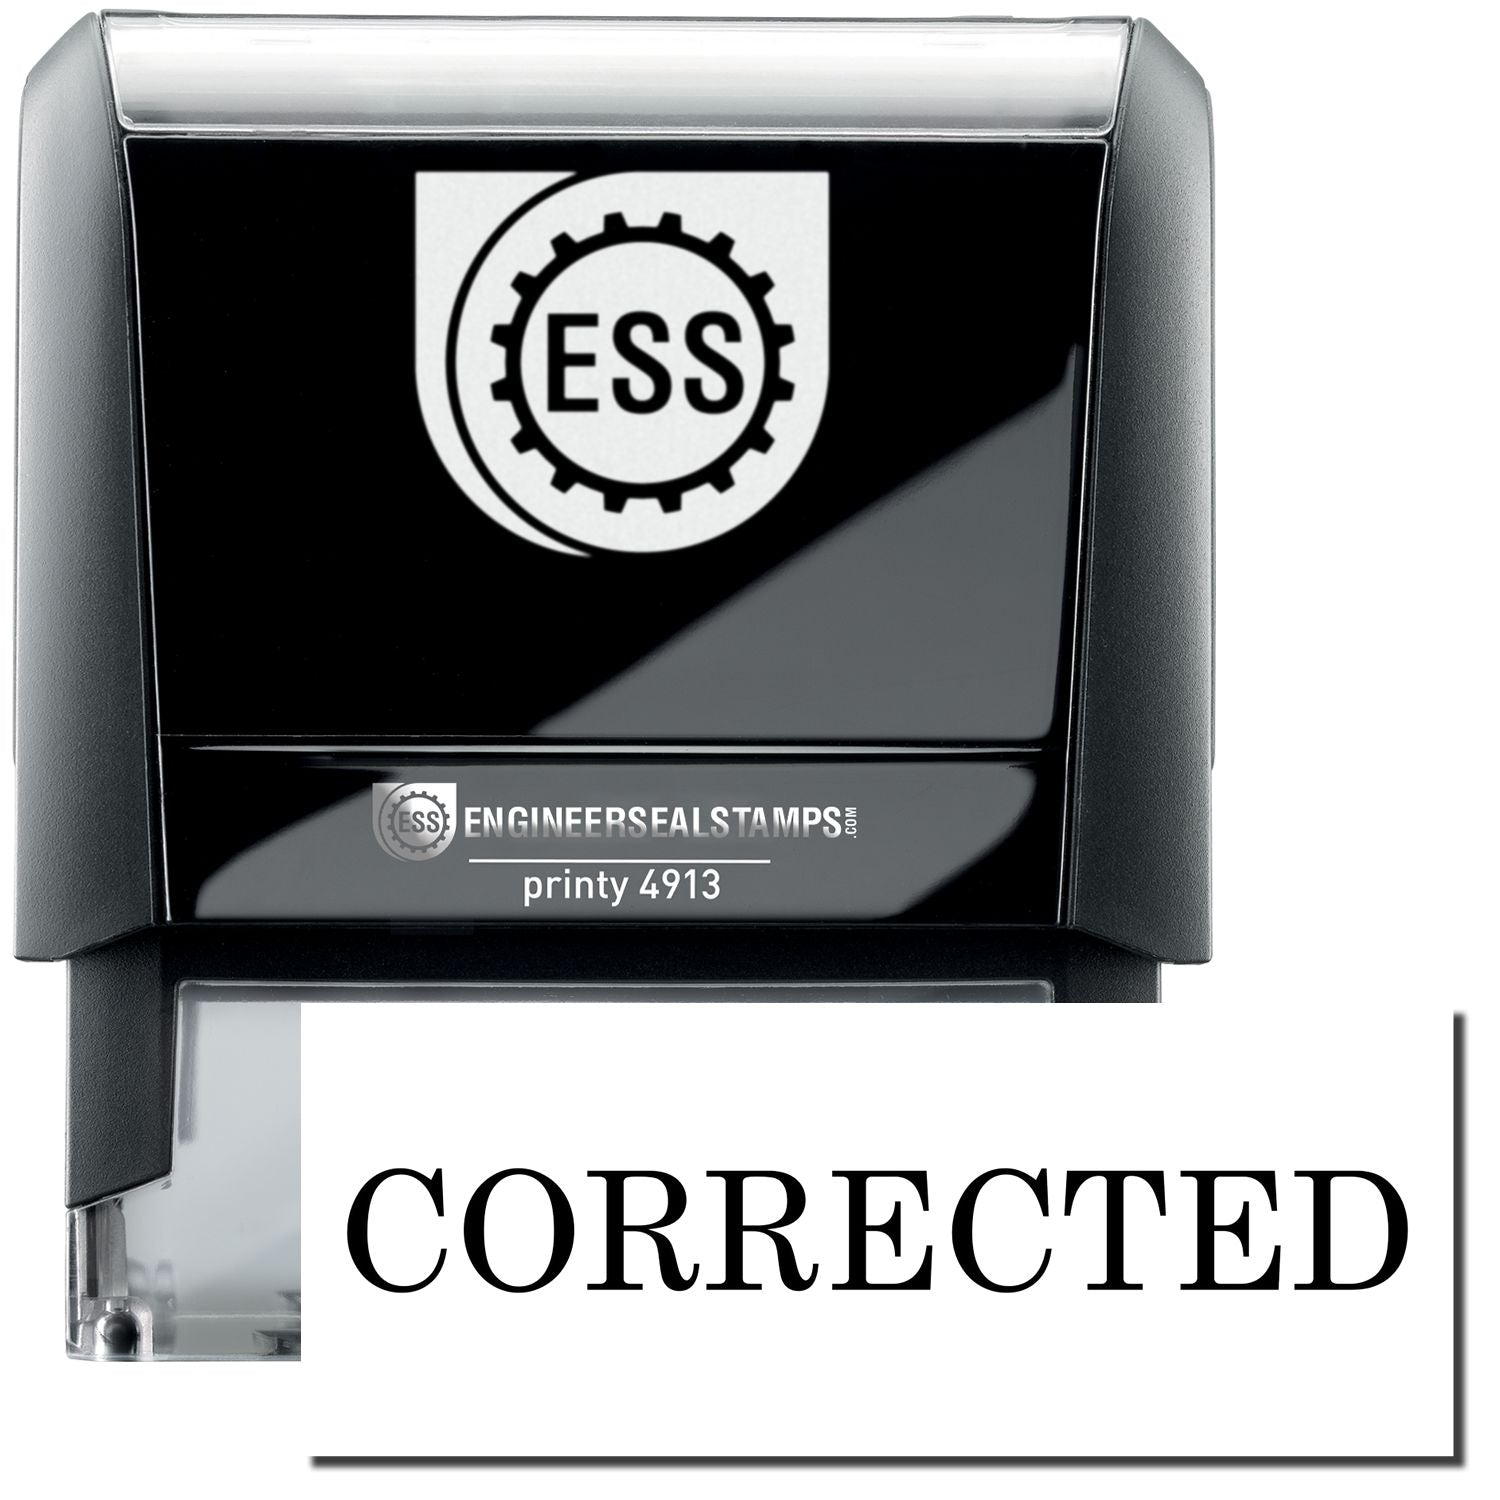 A self-inking stamp with a stamped image showing how the text "CORRECTED" in a large bold font is displayed by it.